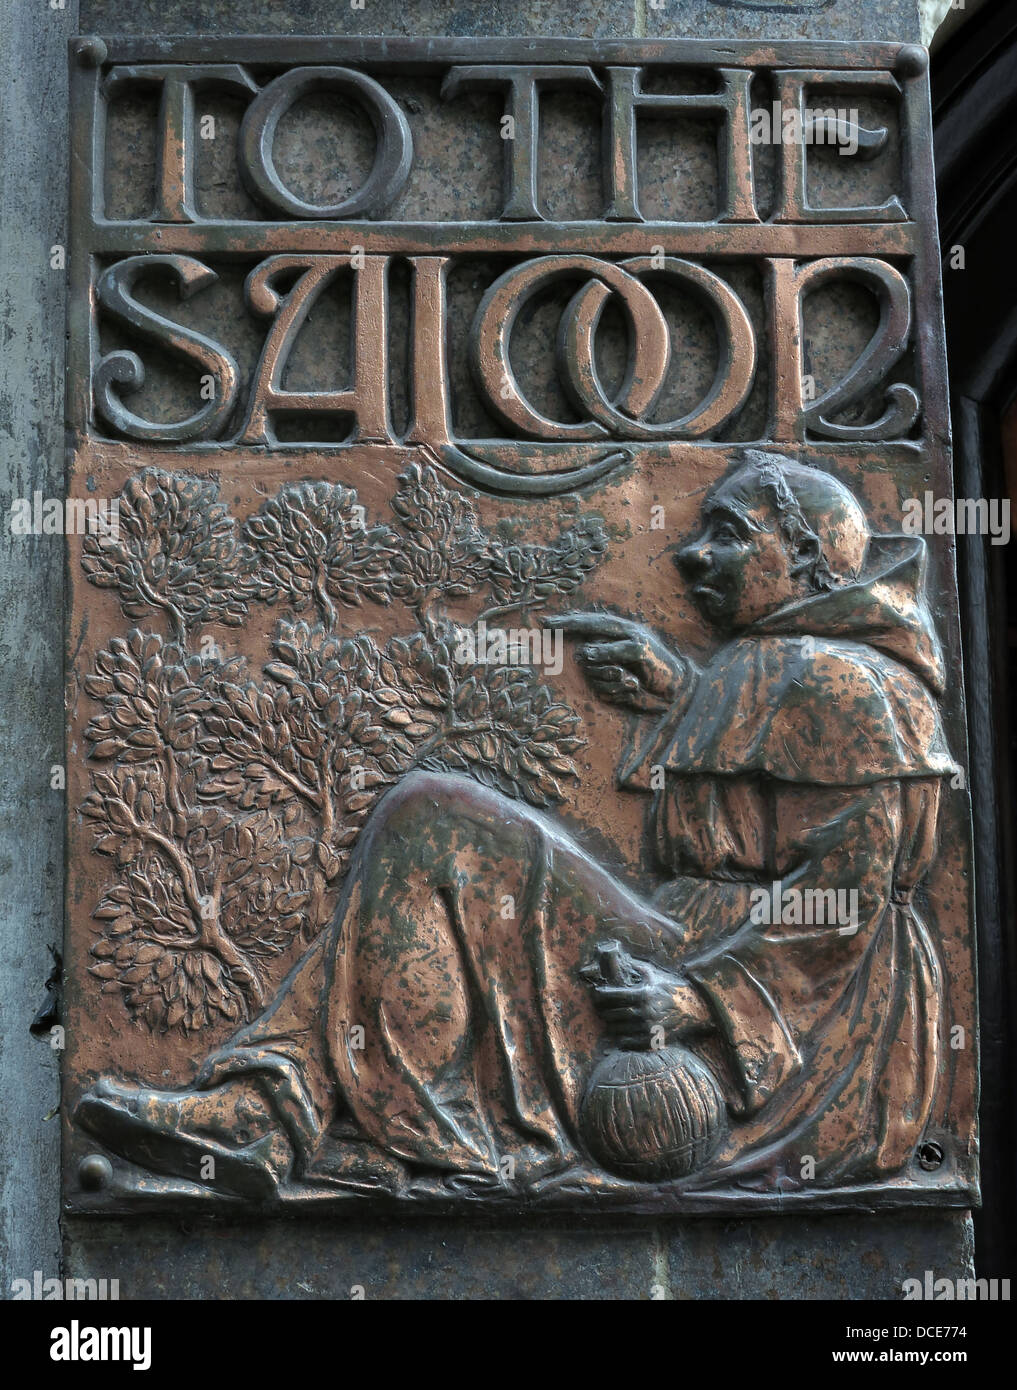 To The saloon copper plate engraving, outside the historic Black Friar pub , Blackfriars London England UK Stock Photo